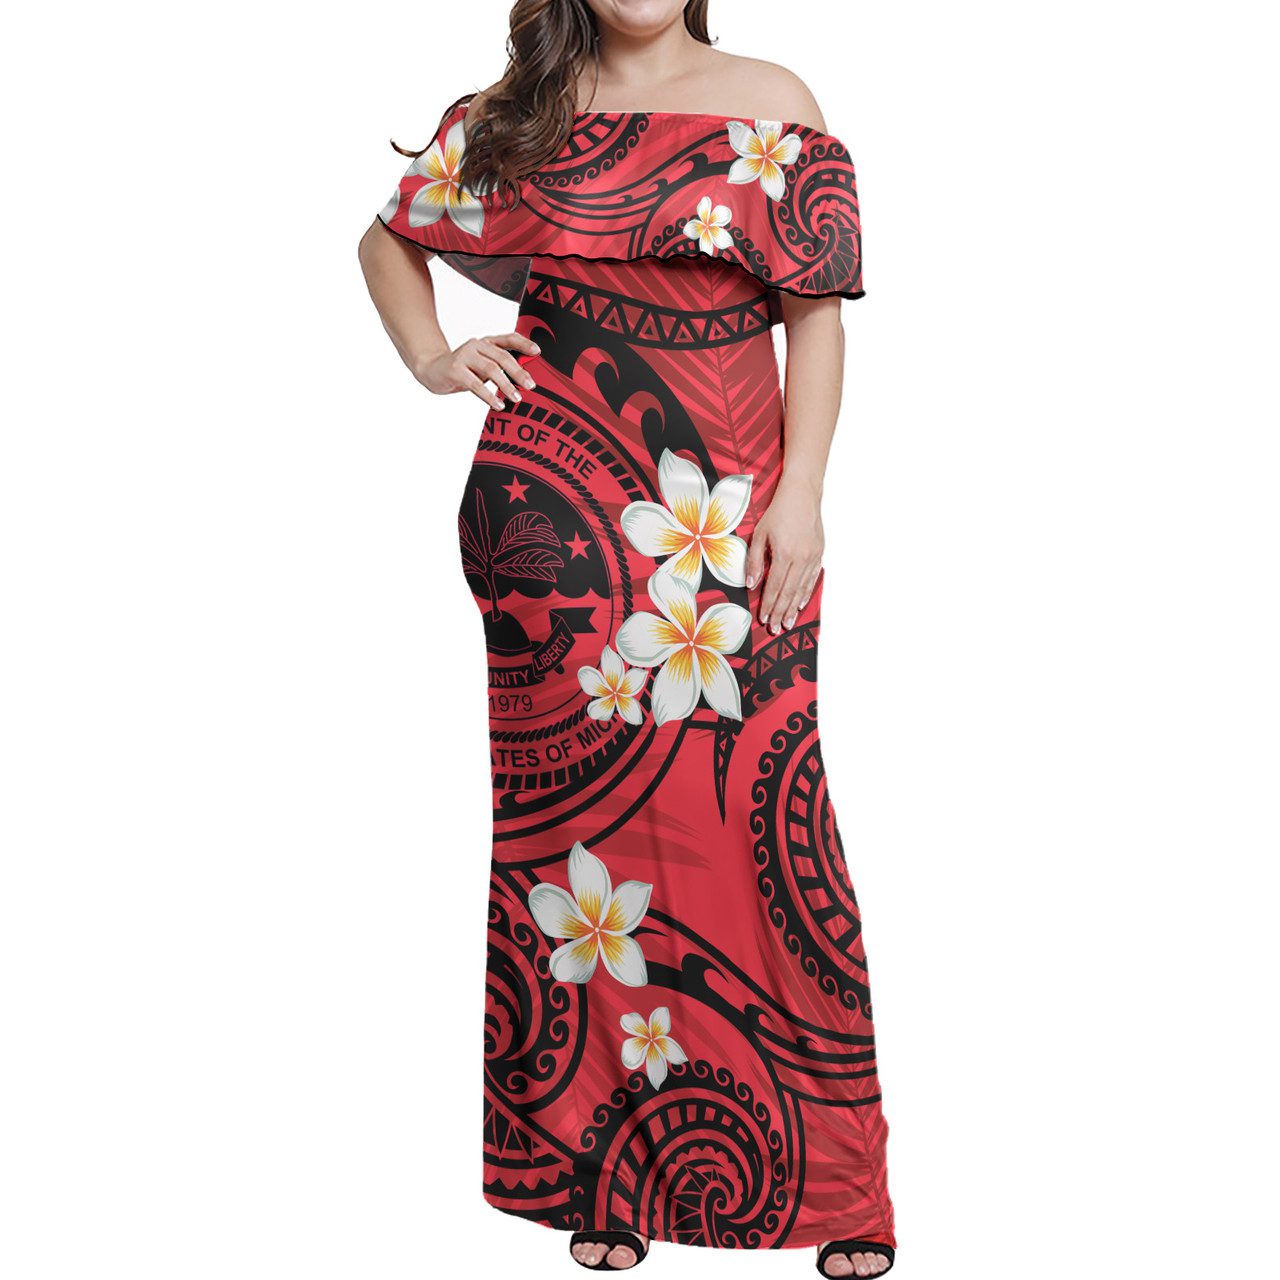 Federated States Of Micronesia Off Shoulder Long Dress Plumeria Flowers Tribal Motif Red Version